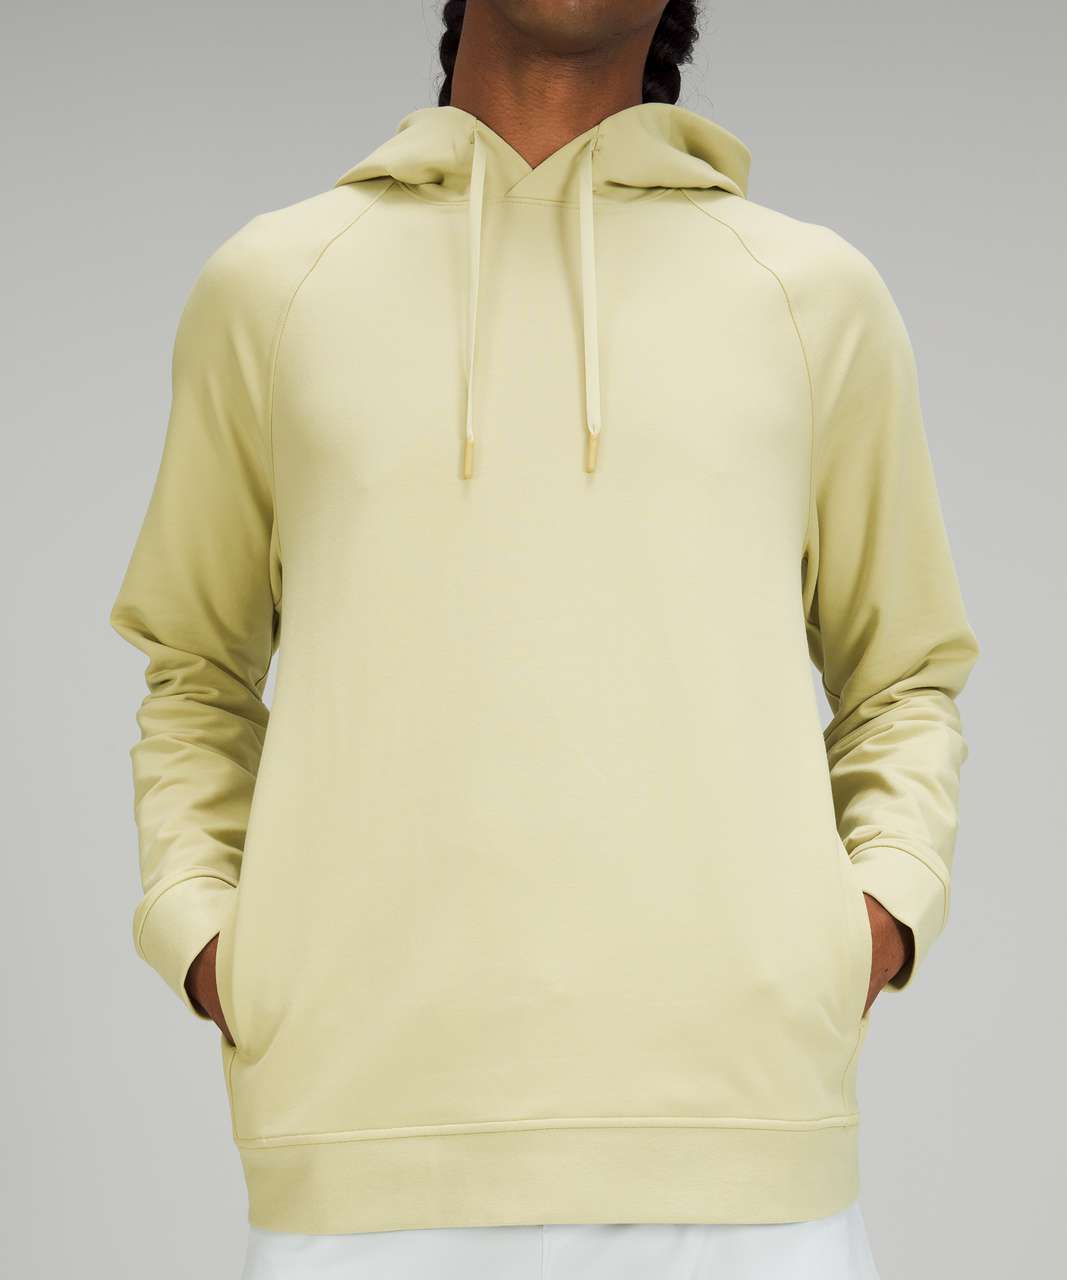 Lululemon City Sweat Pullover Hoodie French Terry - Dew Green